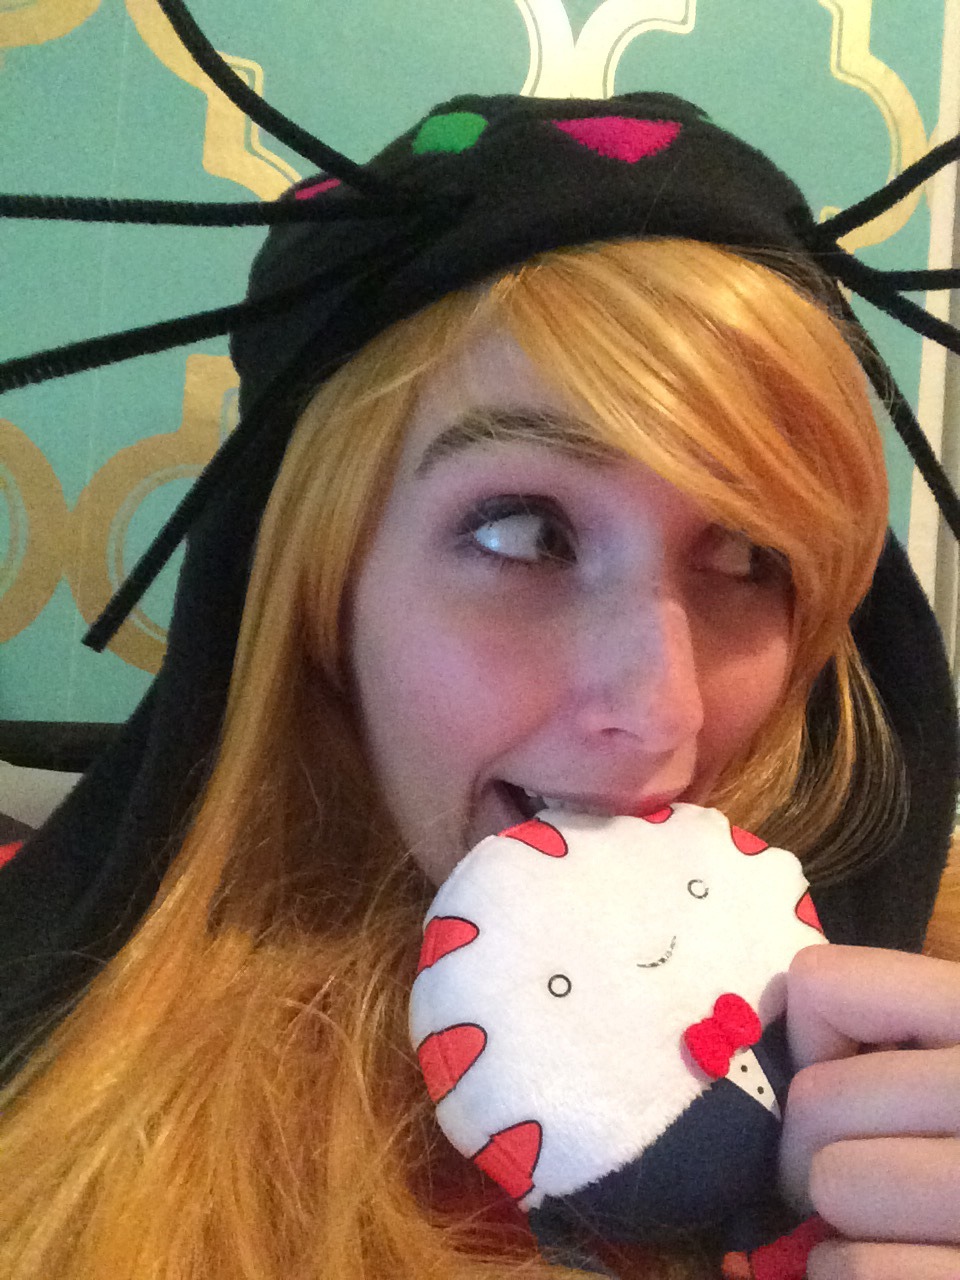 Got in my hat and a small peppermint butler today for my Susan strong cosplay!